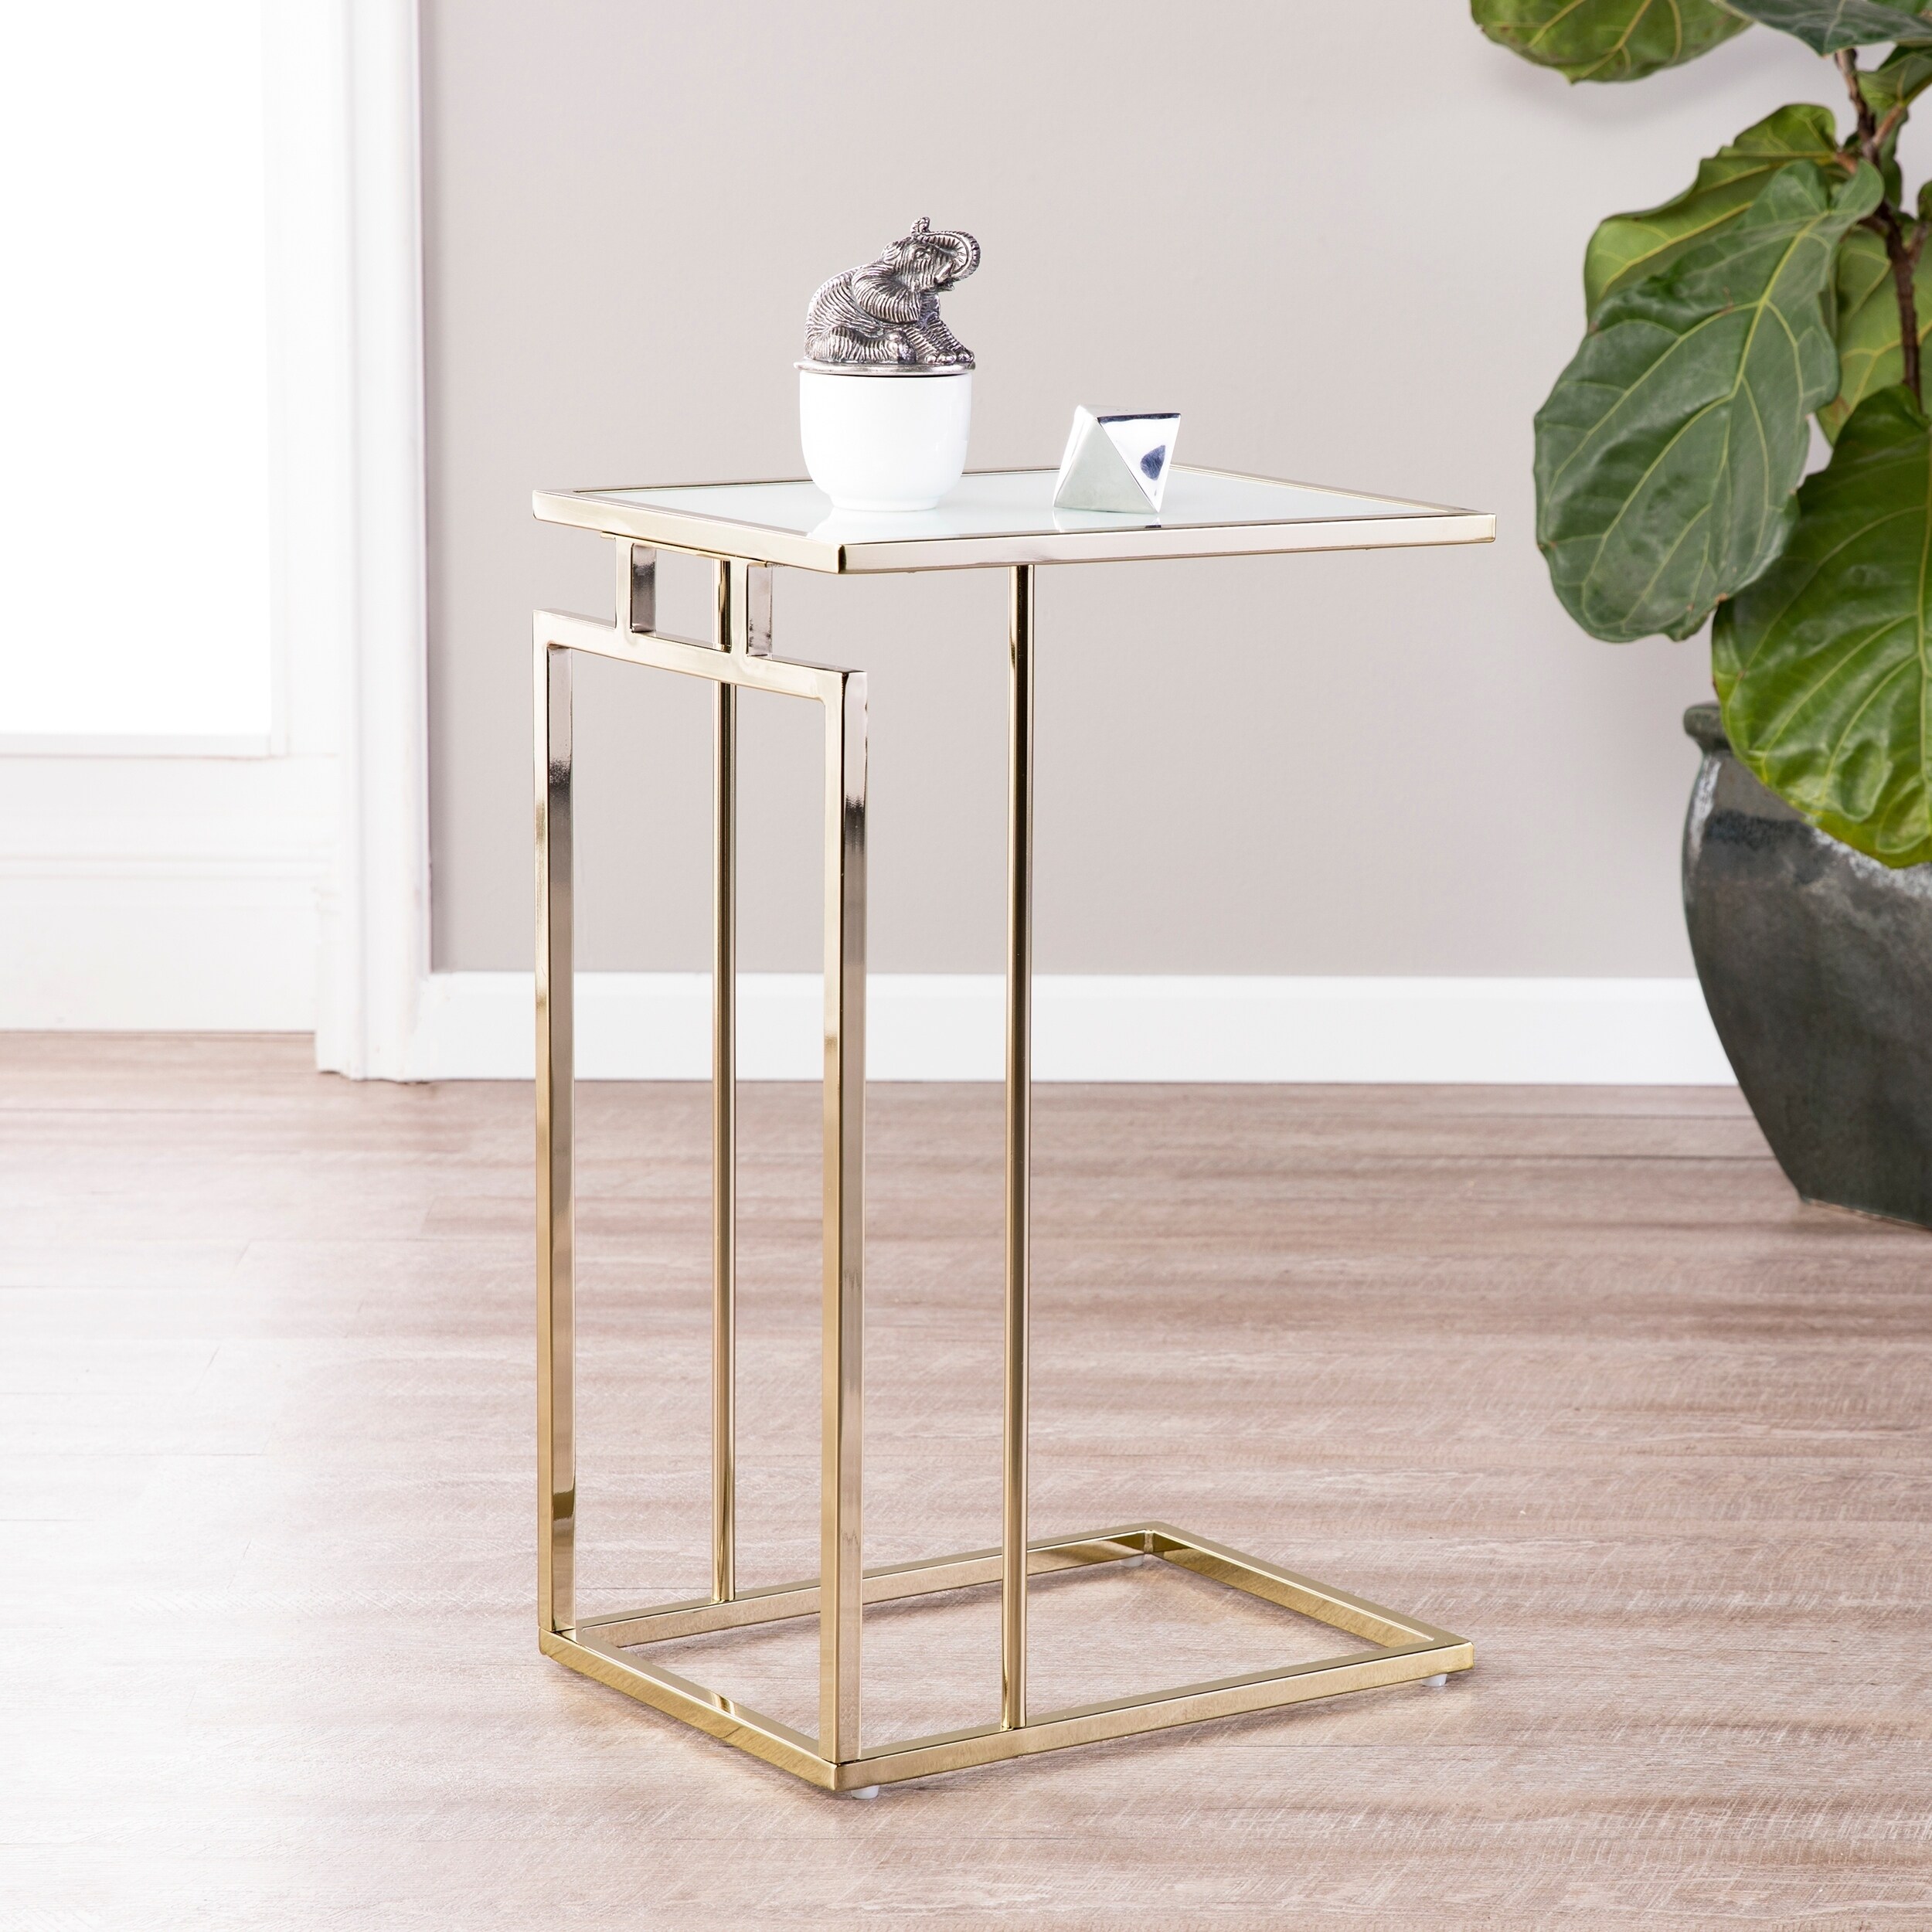 Buy Coffee Console Sofa End Tables Online At Overstockcom Our